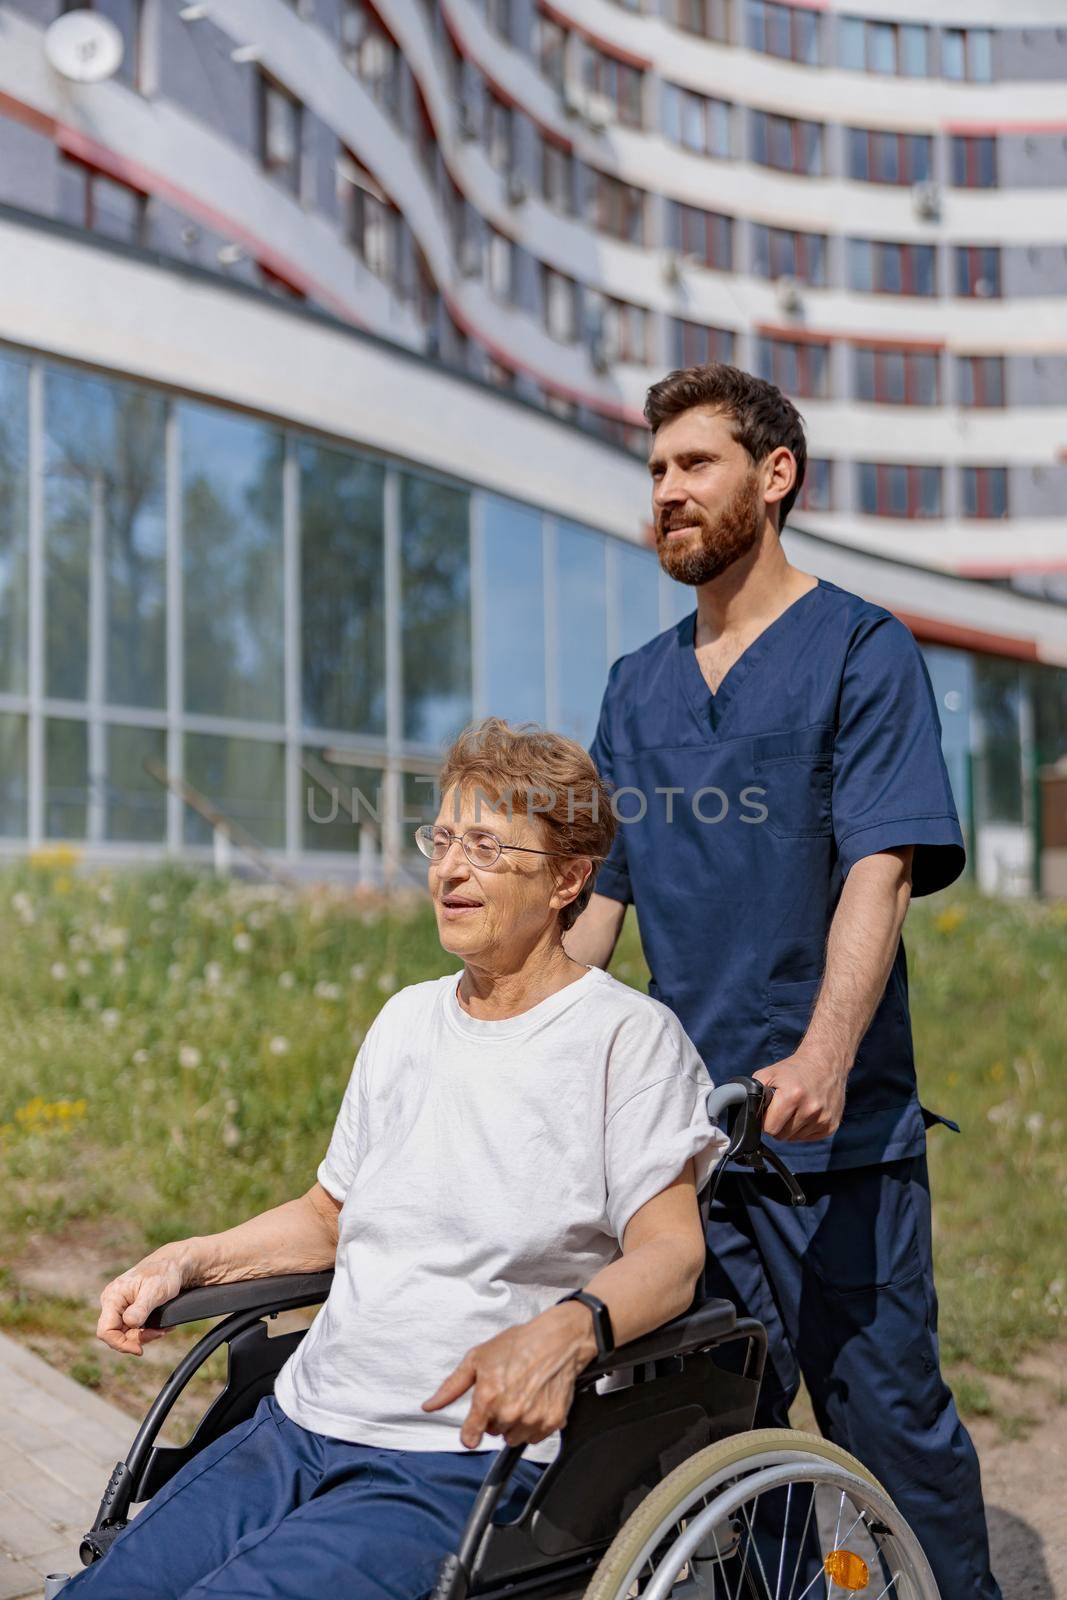 Nurse talking to patient on wheelchair in hospital yard . Rehabilitation concept.